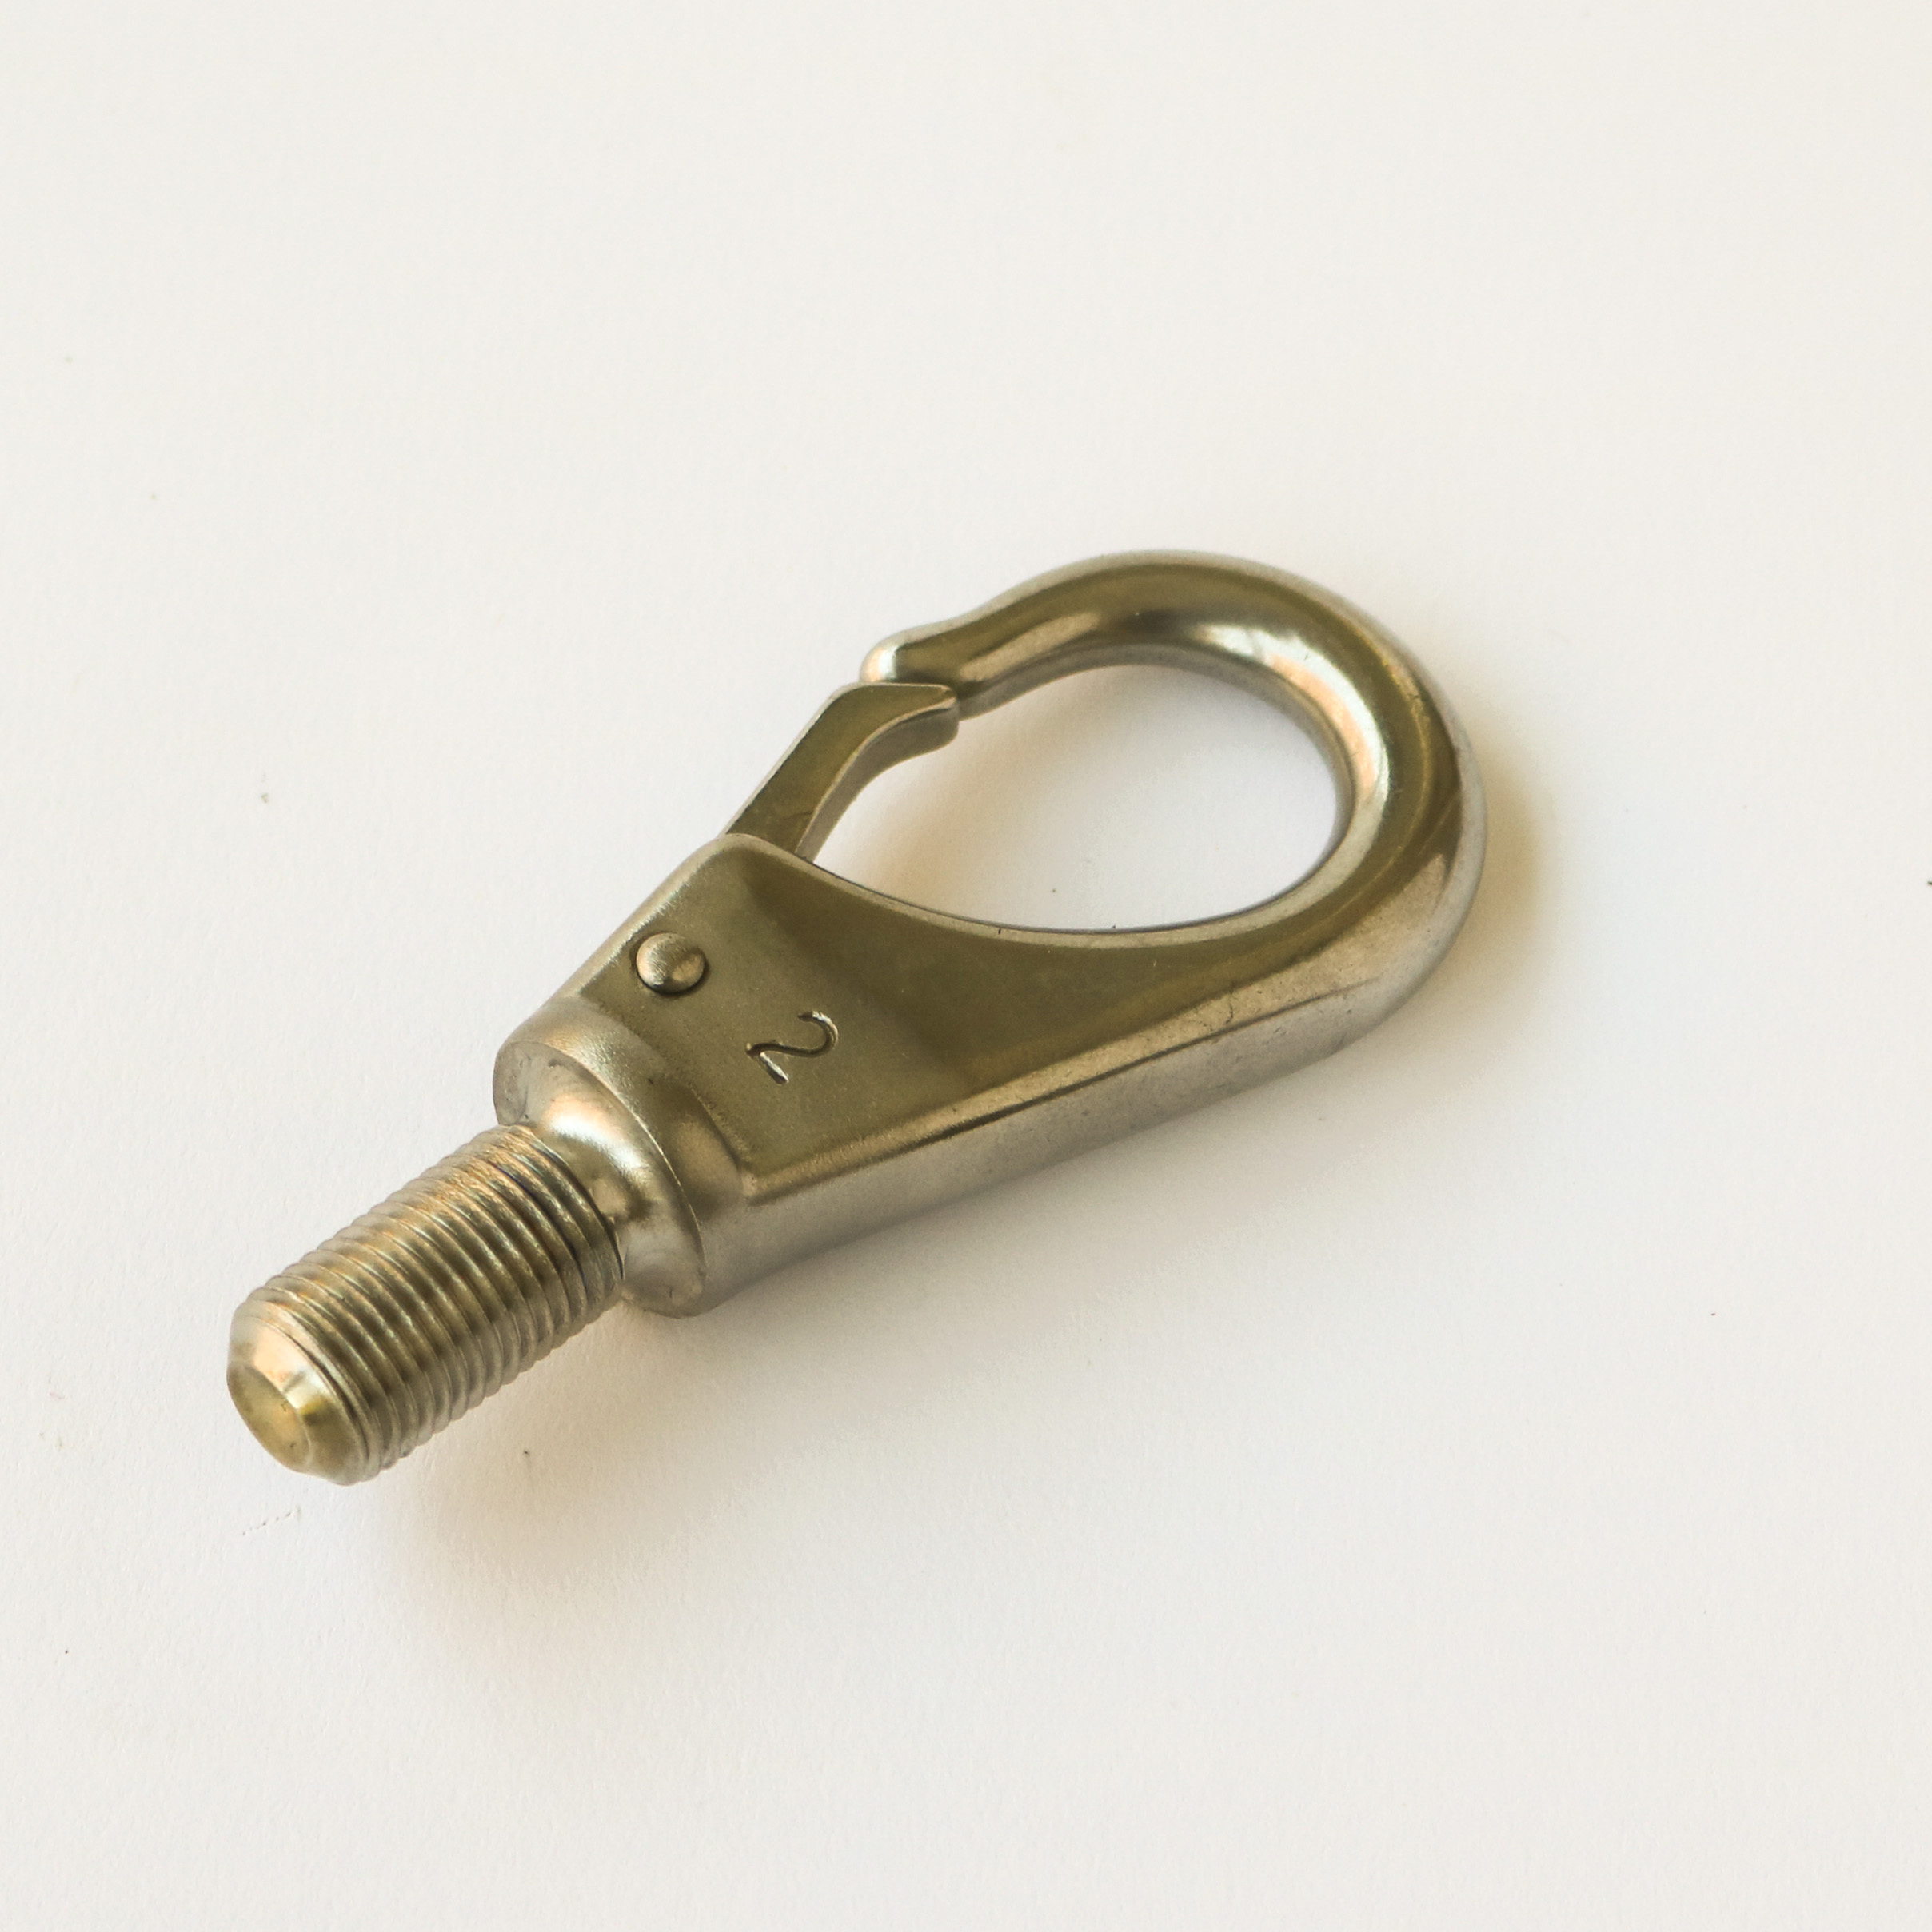 Closed Clasp Hook Attachment